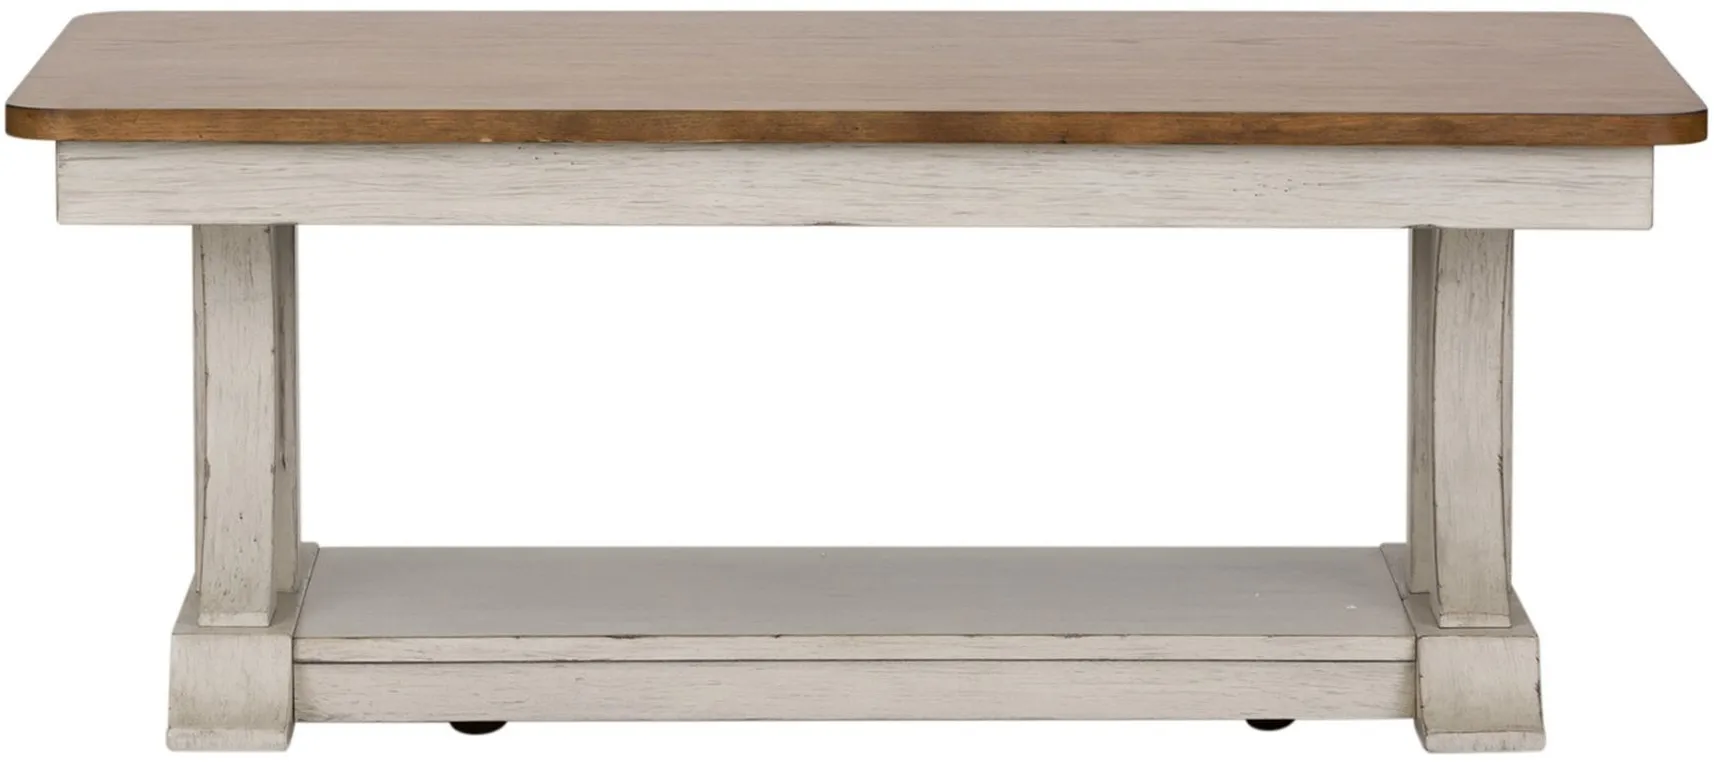 Farmhouse Reimagined Rectangular Coffee Table in White by Liberty Furniture